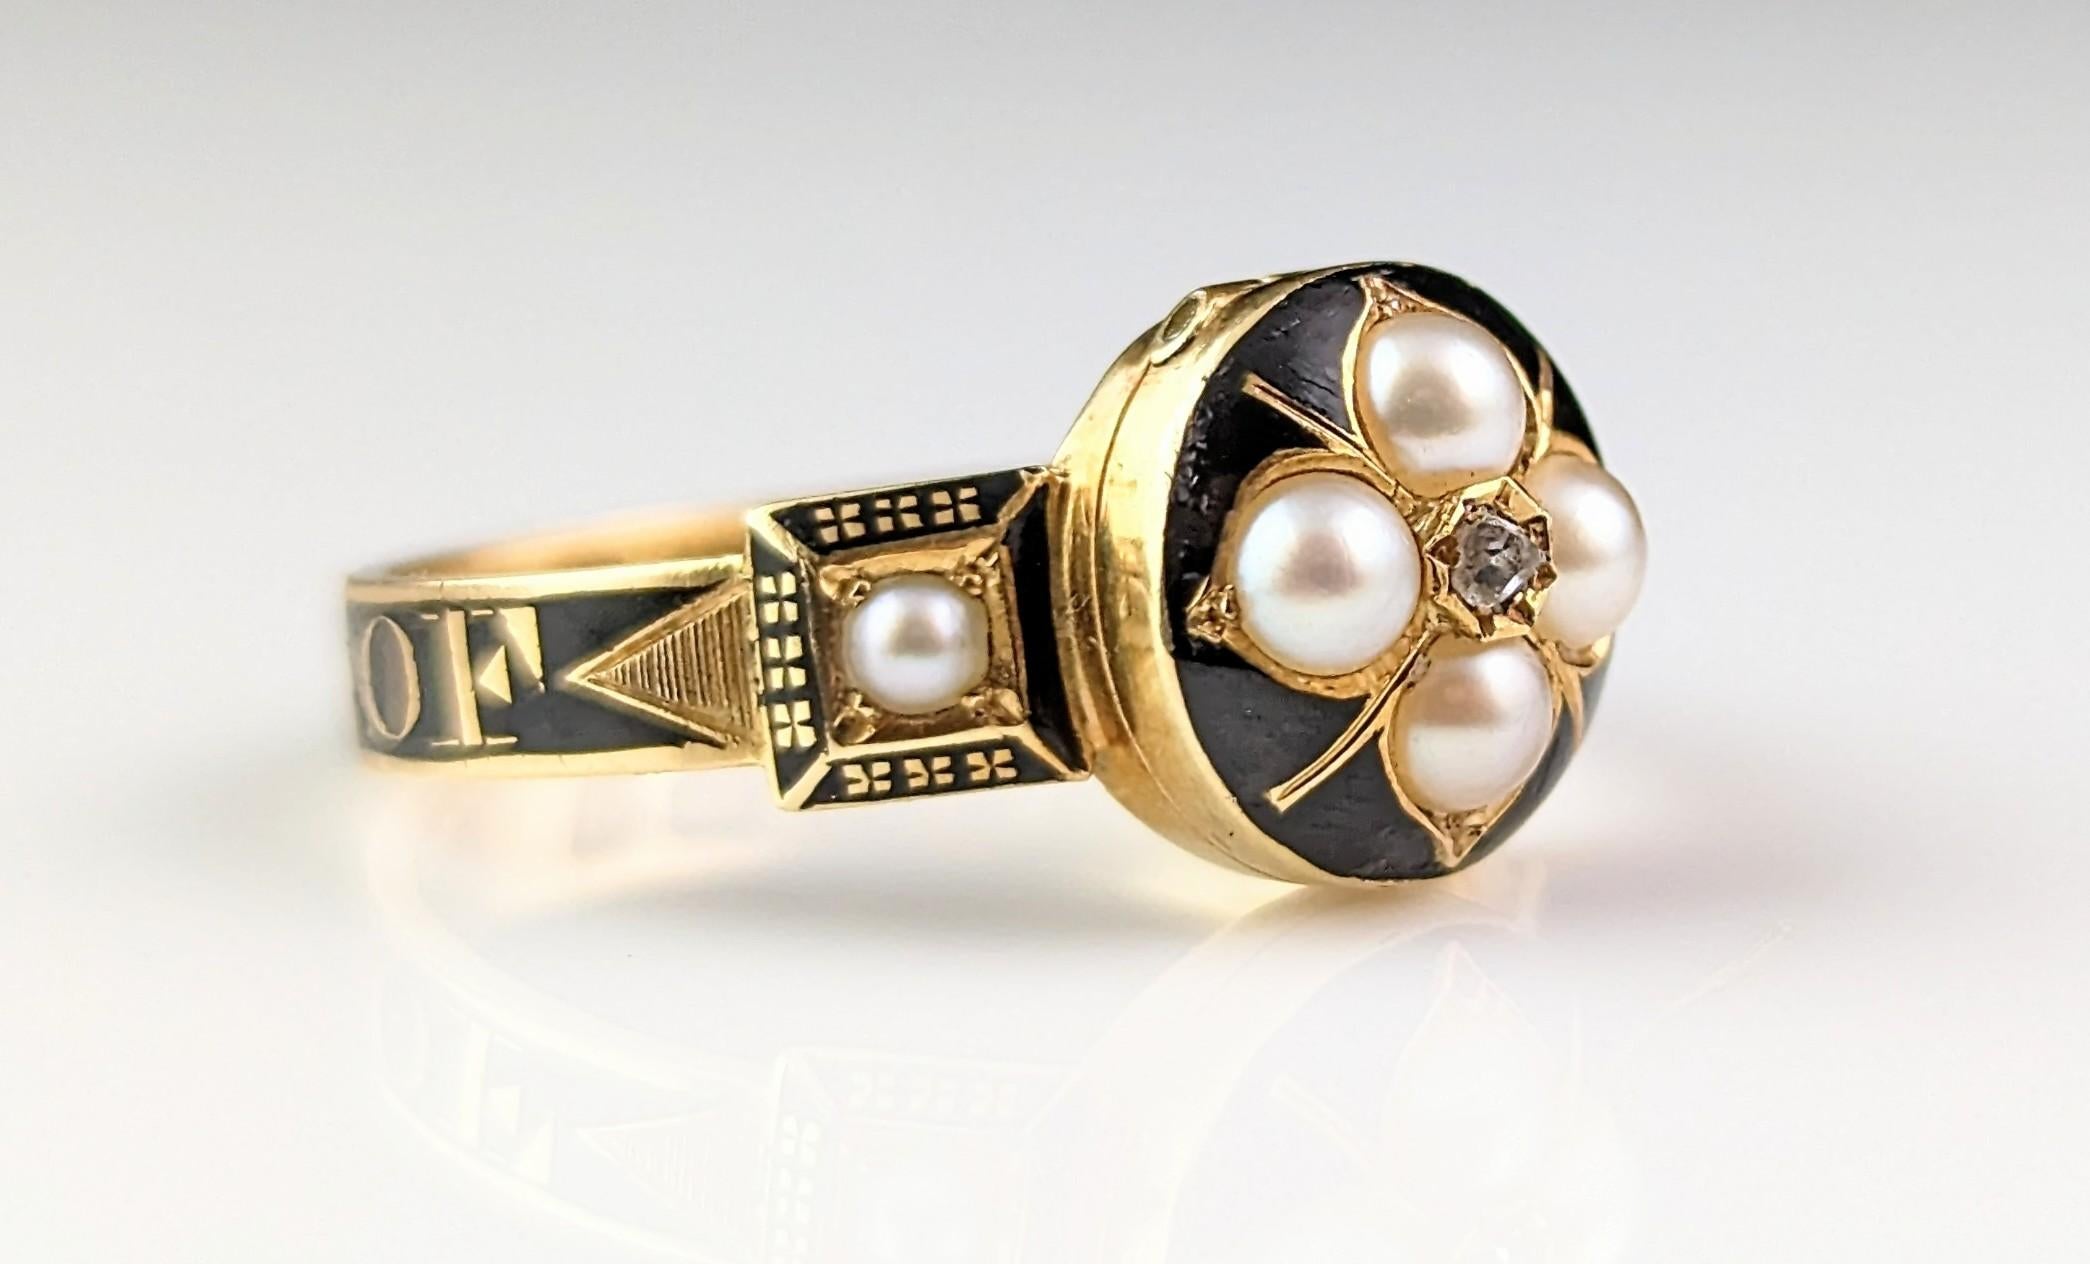 Antique 18k gold Mourning locket ring, Black enamel, Diamond and Pearl  For Sale 7